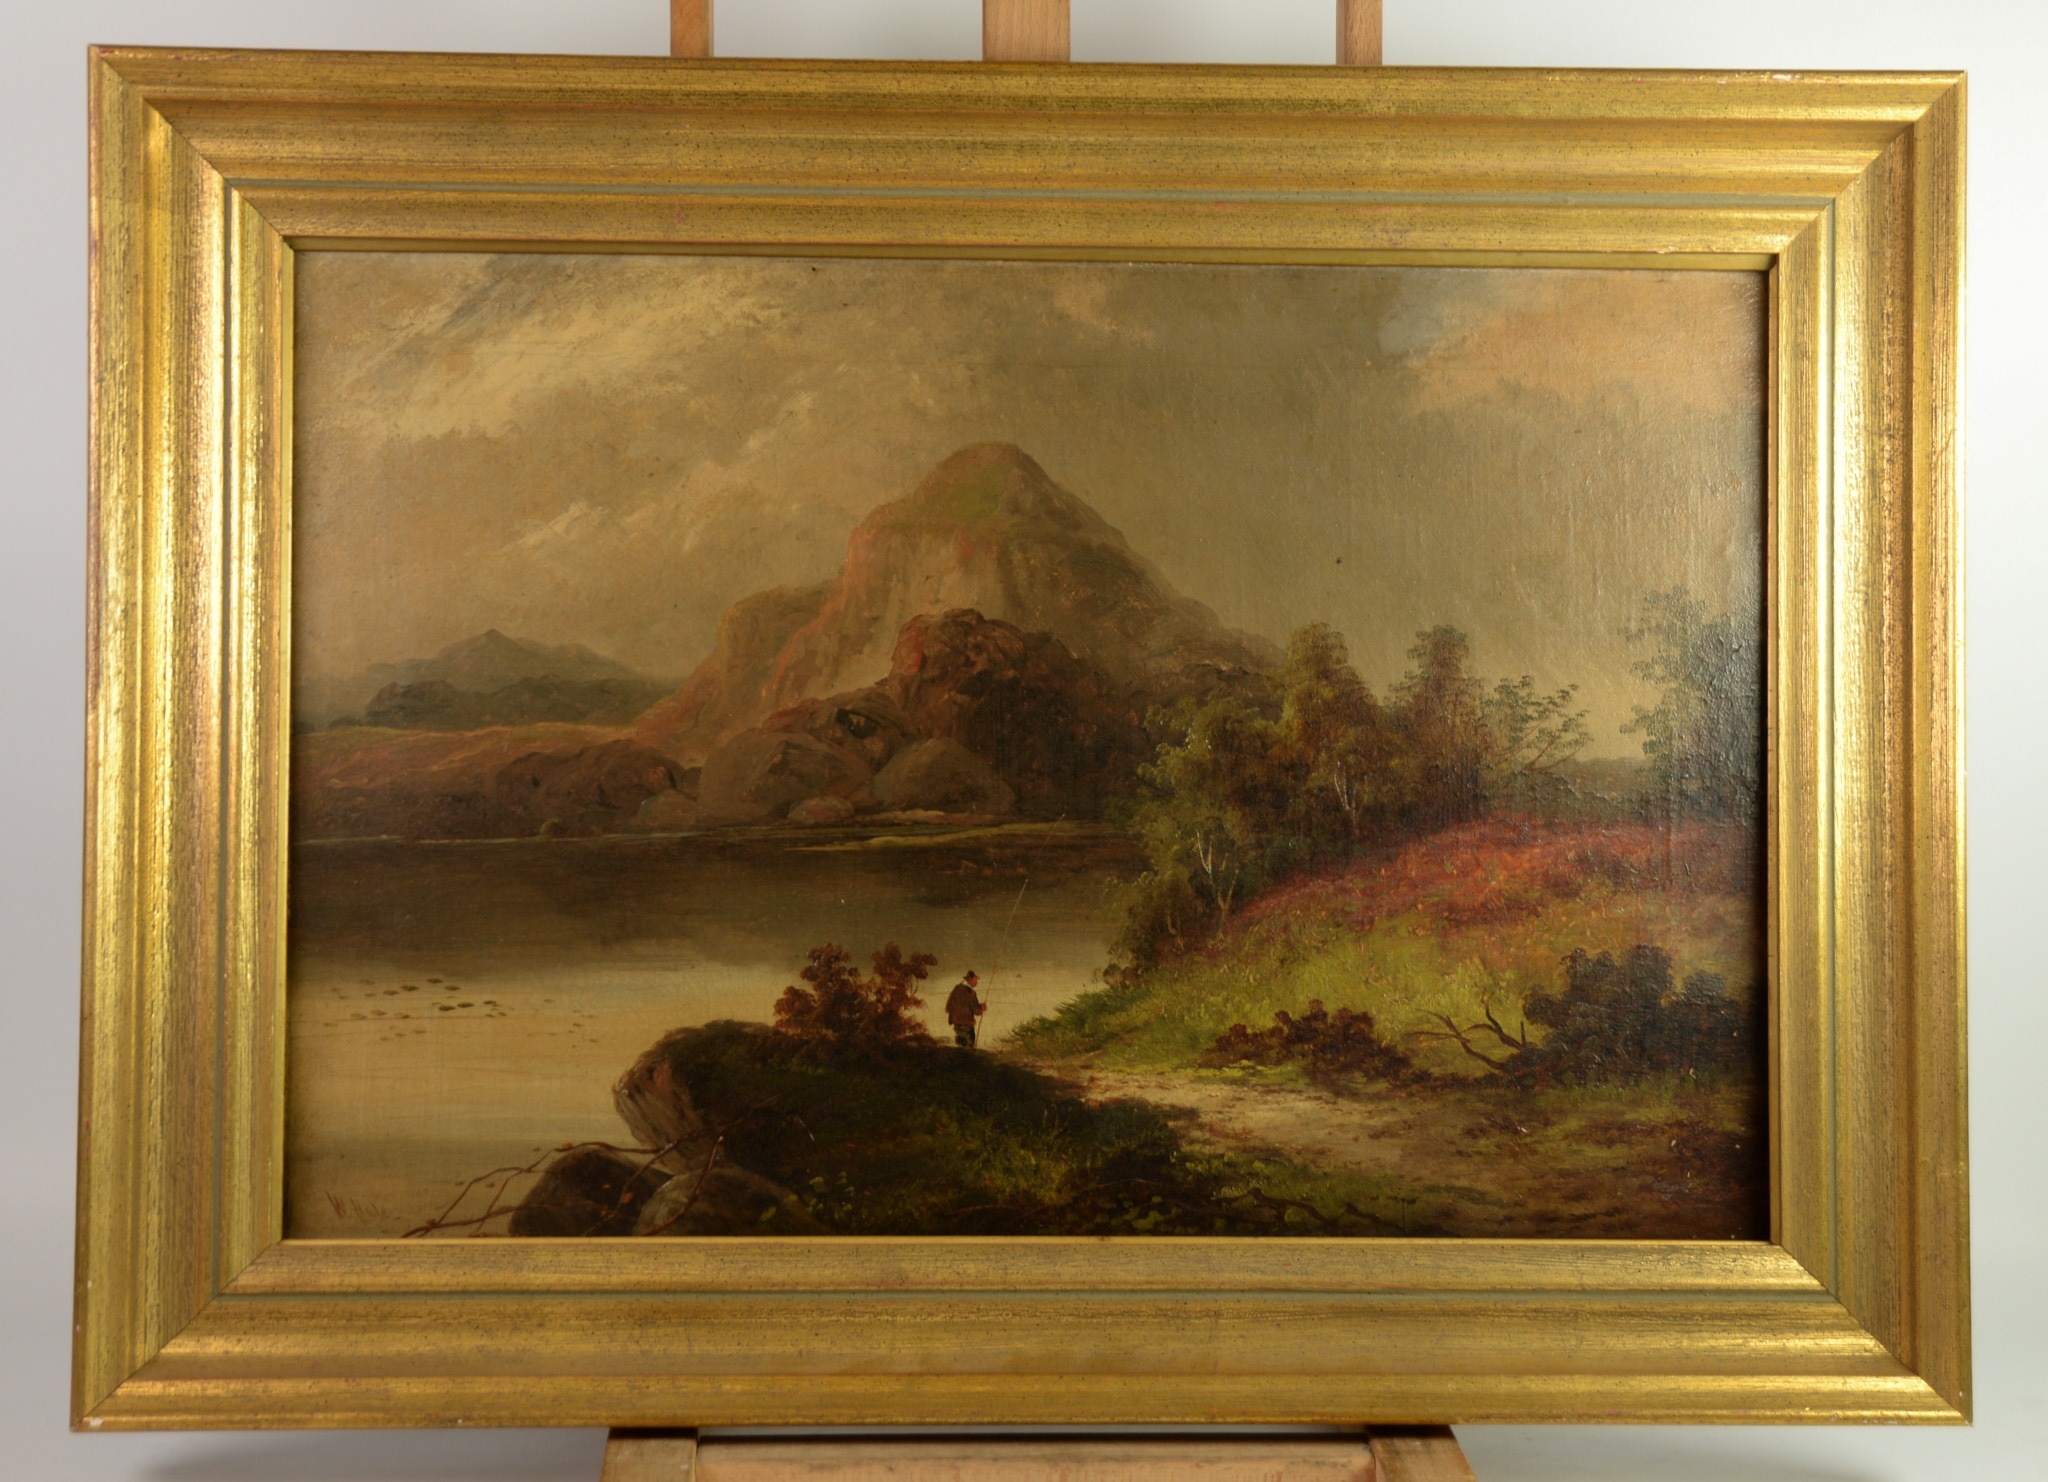 W HALE OIL ON CANVAS Landscape with mountains, lake and figure Signed lower left 15 ½” x 23 ½” (39. - Image 2 of 4